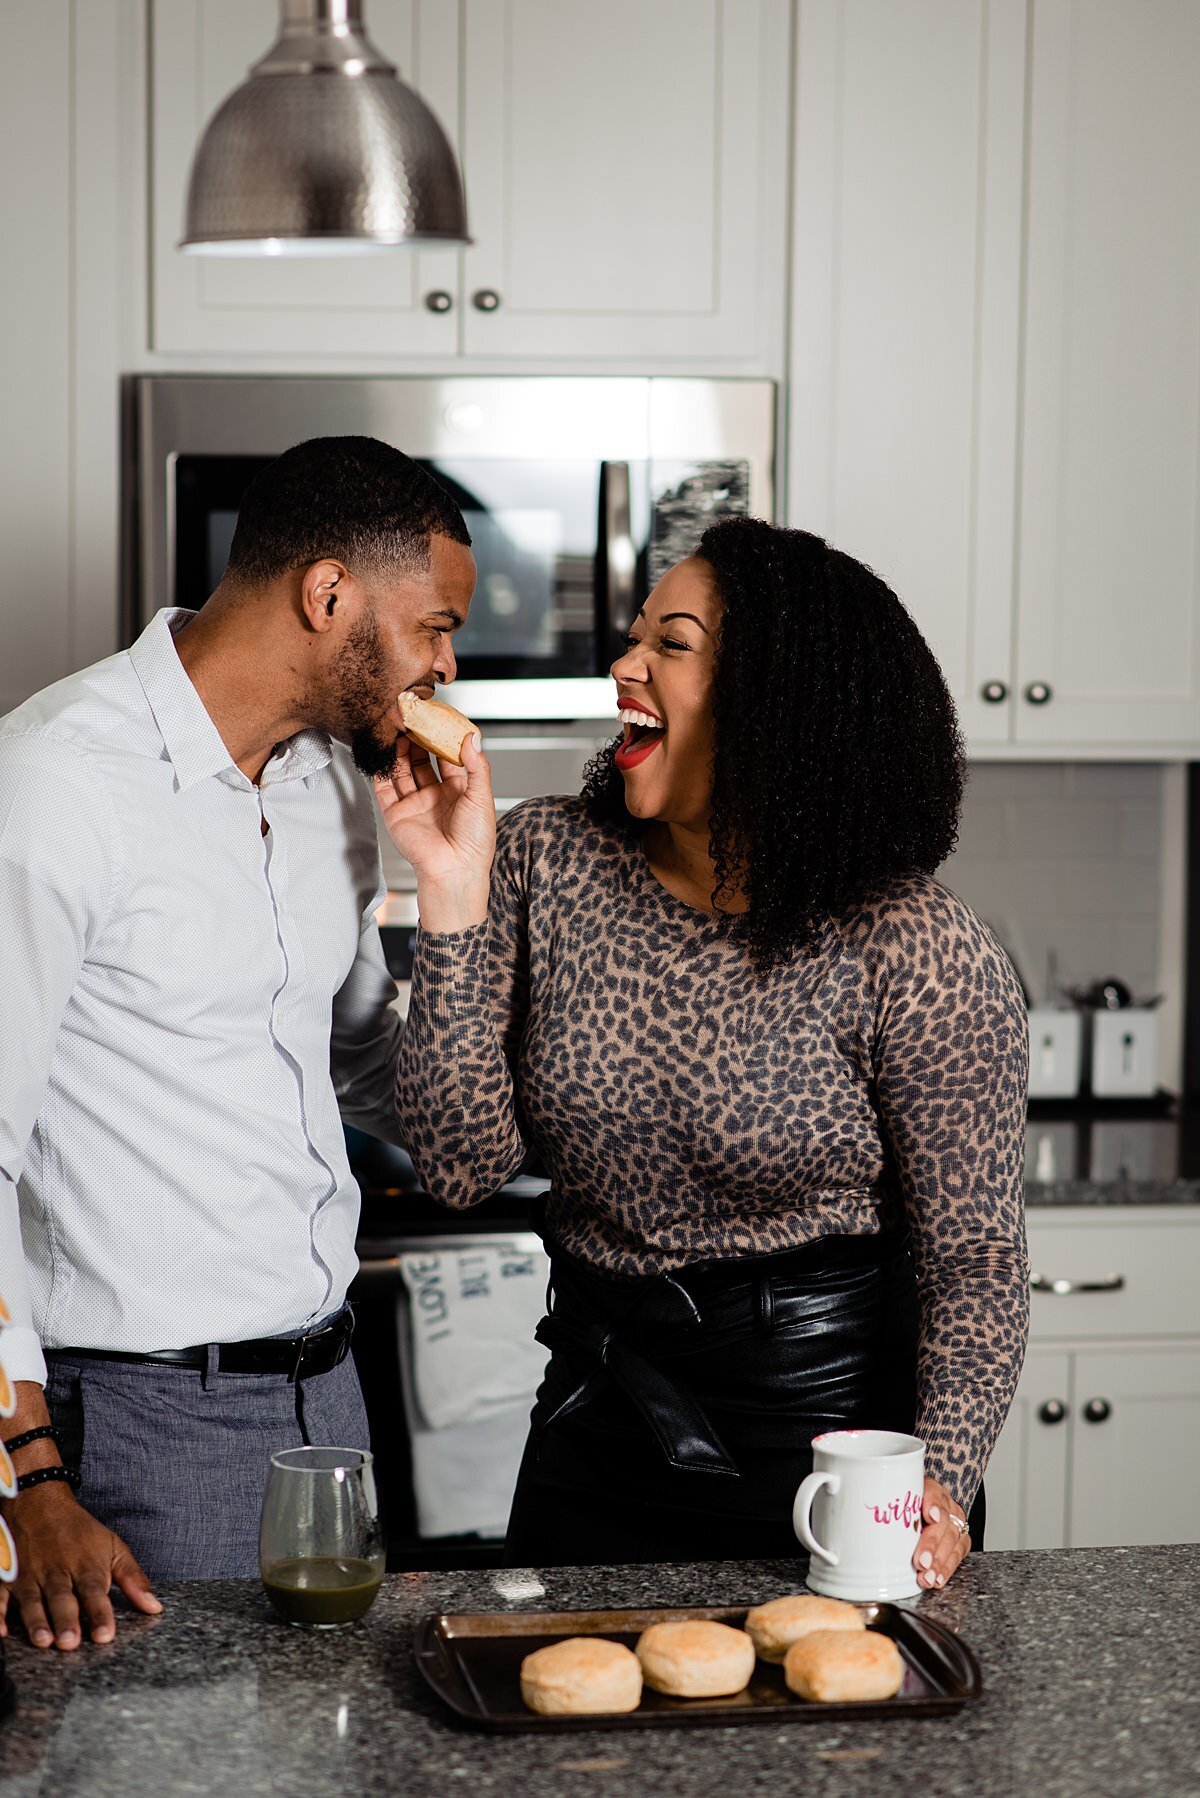 Candid moment of Jasmine Sweet feeding her husband a biscuit in the kitchen of their new house